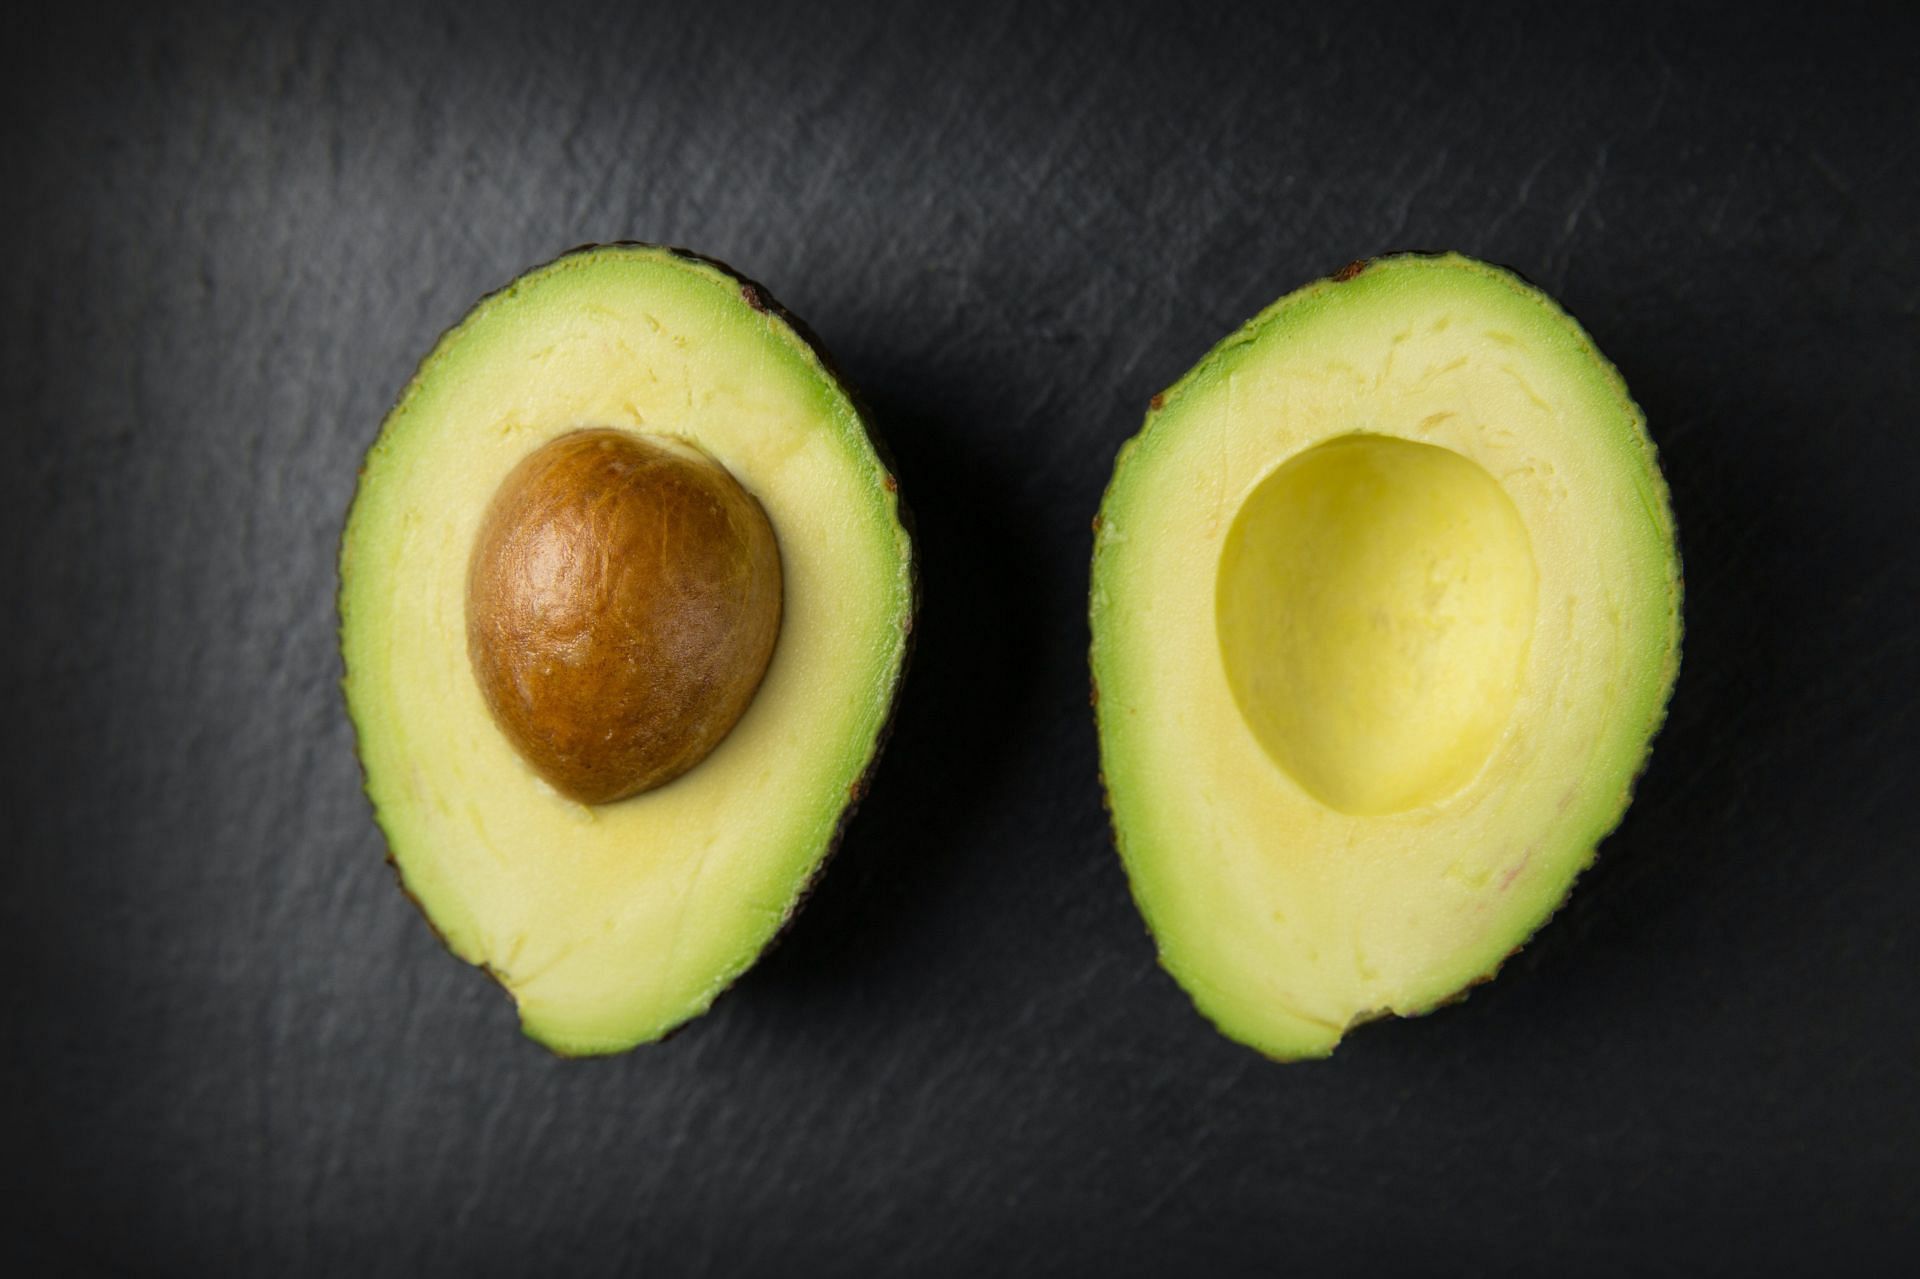 Importance of foods that help elasticity in skin (image sourced via Pexels / Photo by Foodie)